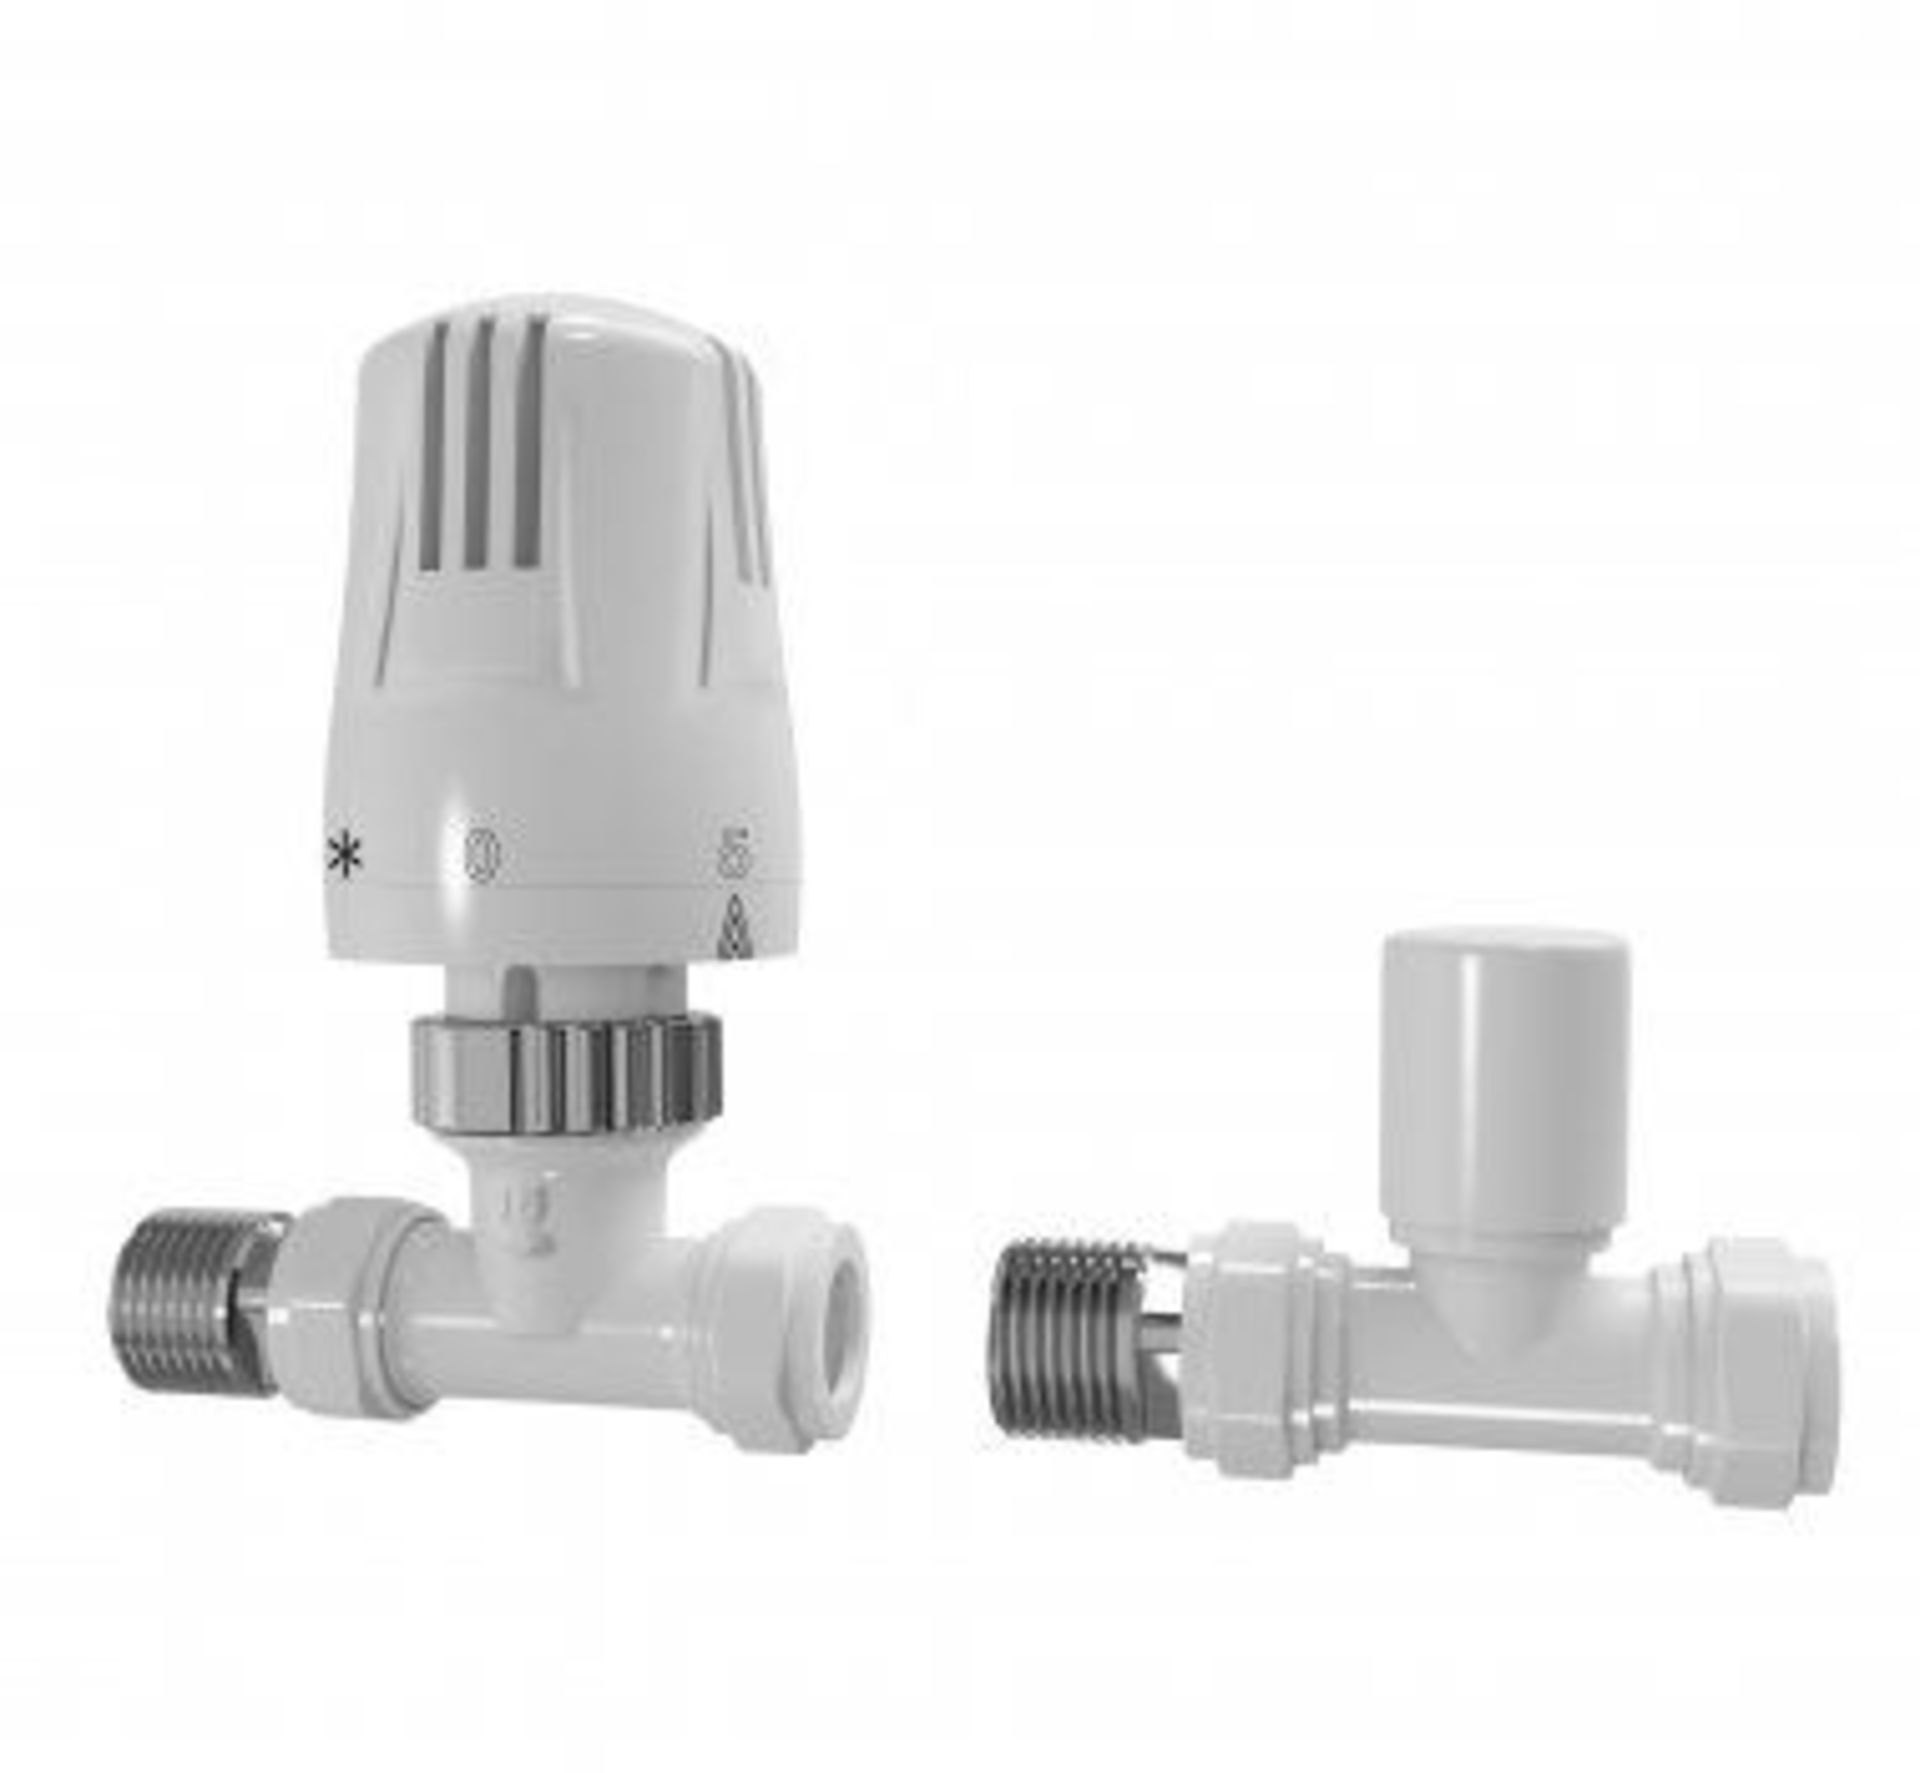 New & Boxed White Thermostatic Straight Radiator Valves 15mm Central Heating Taps. Ra32S. Solid